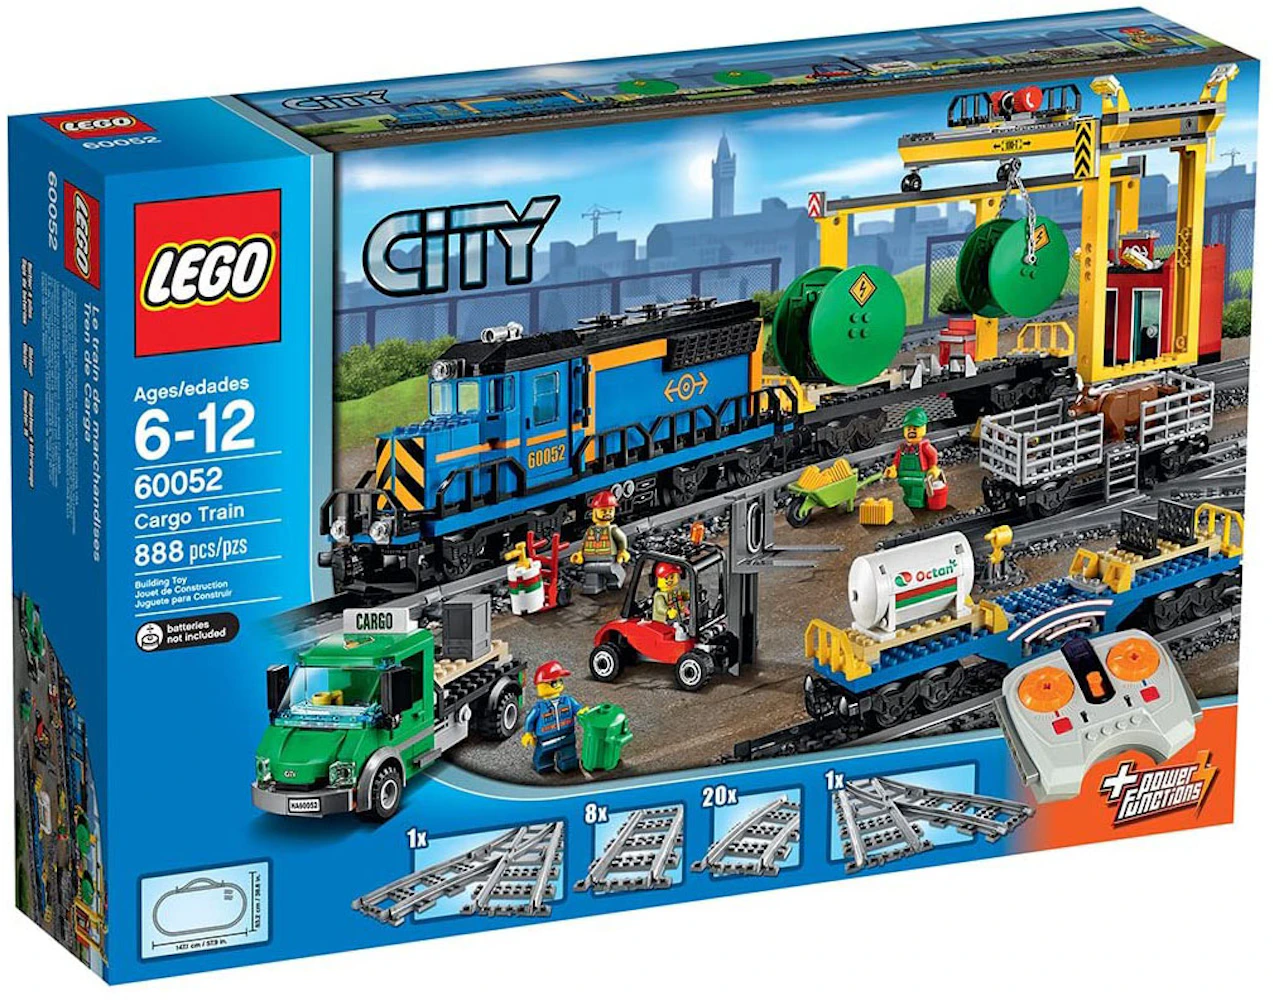 LEGO City Trains Cargo Train Set Block Building Toy 60198 From Japan New